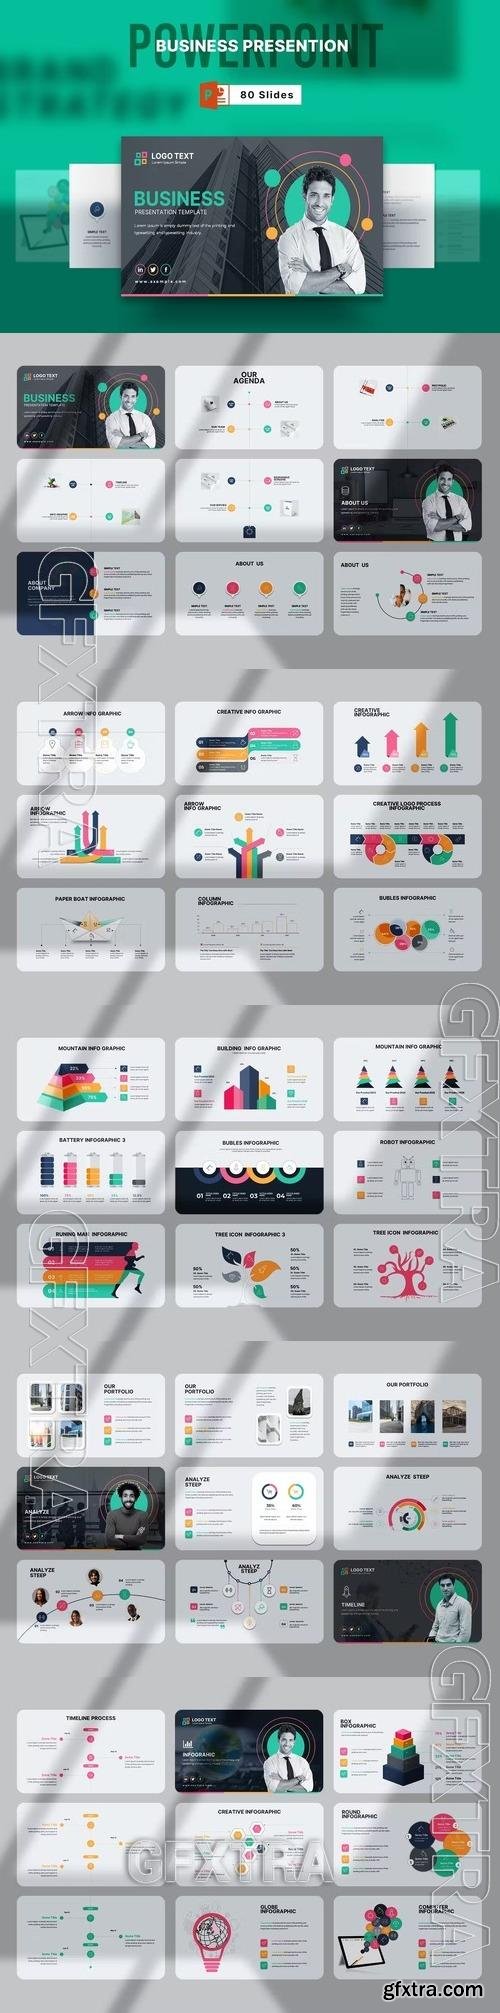 Business Presentation PowerPoint Template AS8P2FN